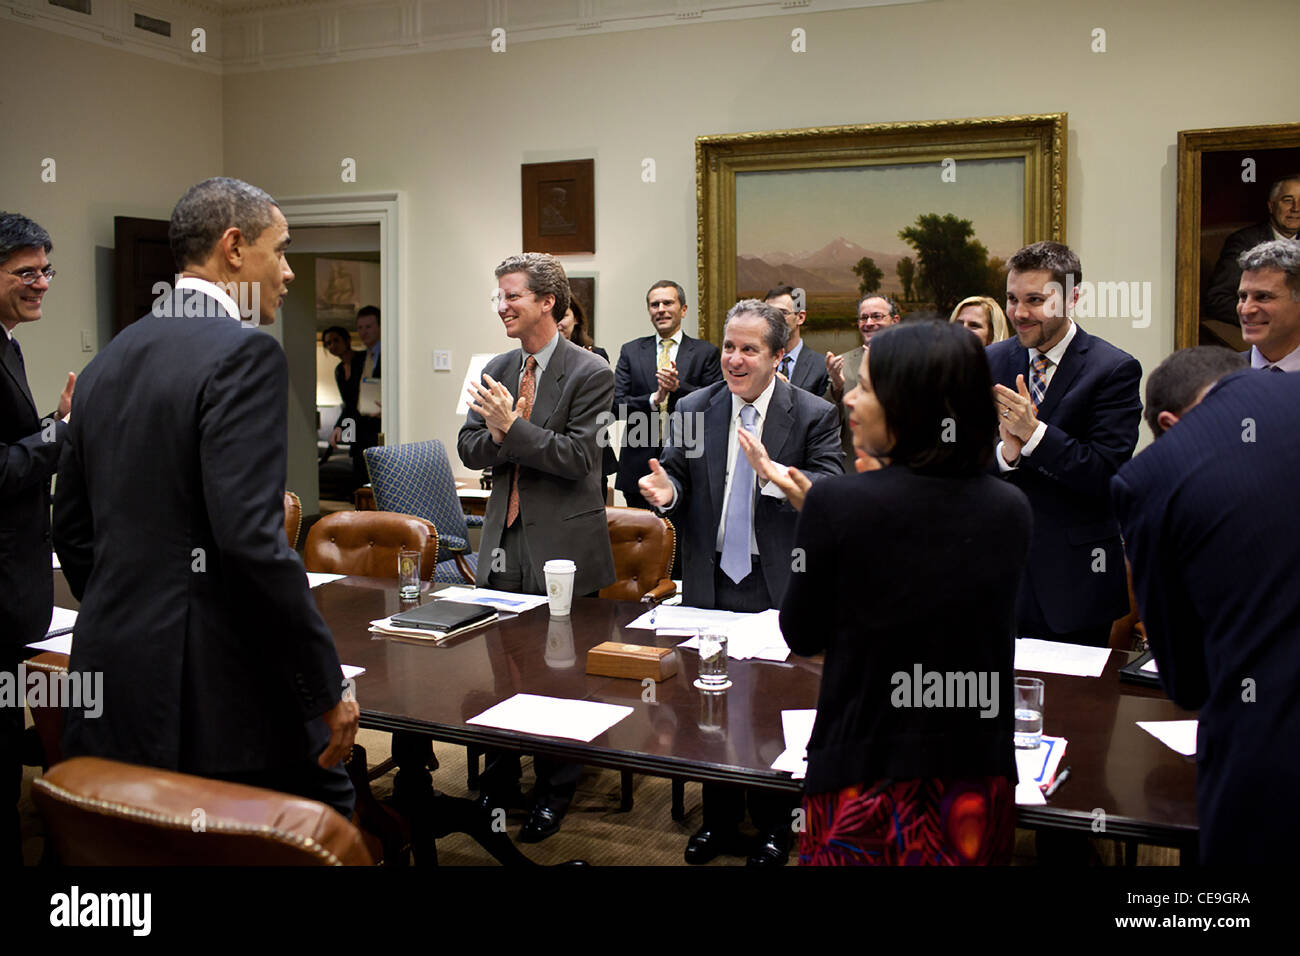 President Barack Obama is congratulated by advisors on the agreement to extend the payroll tax cut, before a meeting in the Roosevelt Room of the White House December 22, 2011 in Washington, DC. Stock Photo